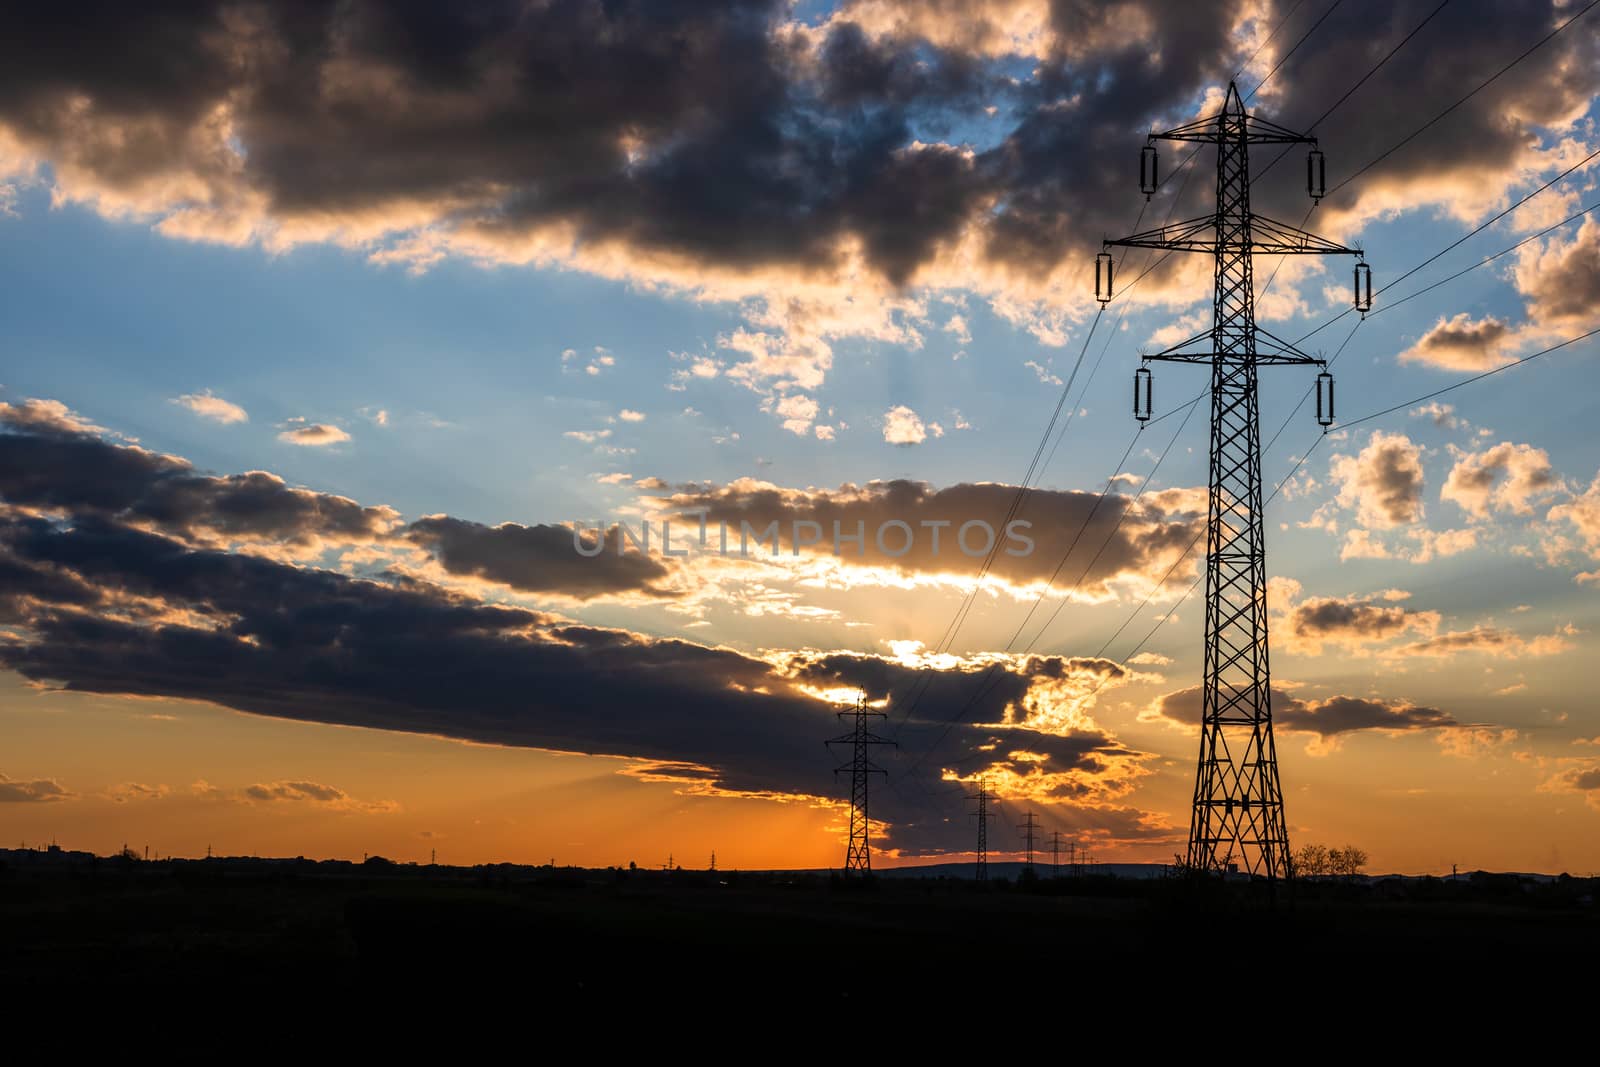 Beautiful dramatic sky and clouds, sunset lights over the transmission tower (electricity pylon) on a field.